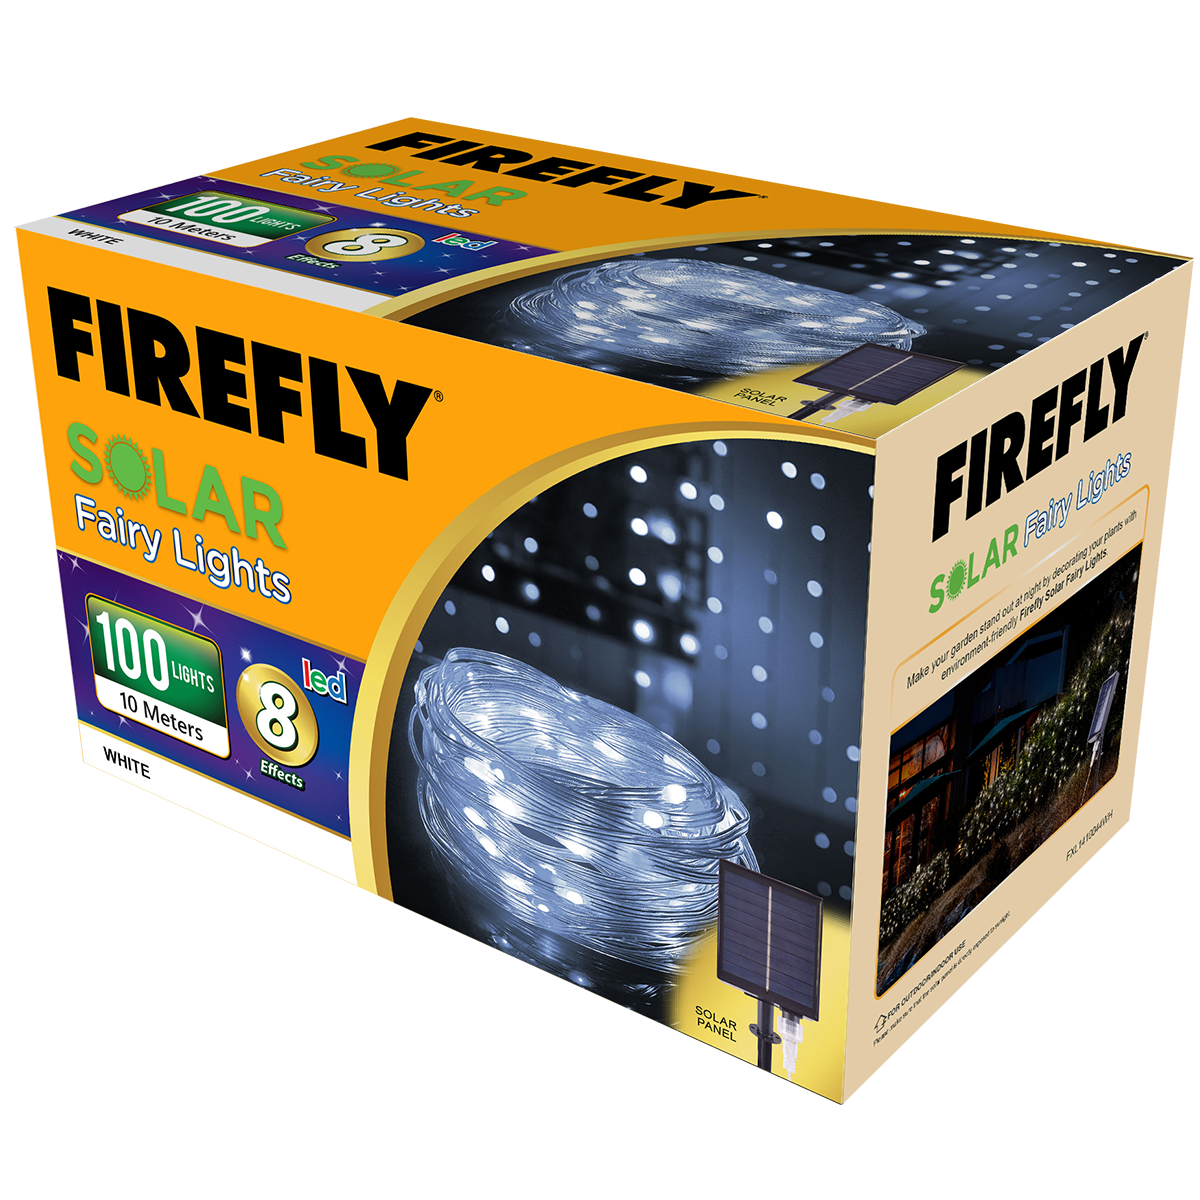 Firefly Bright Solar Fairy Lights 100LED 10 meters